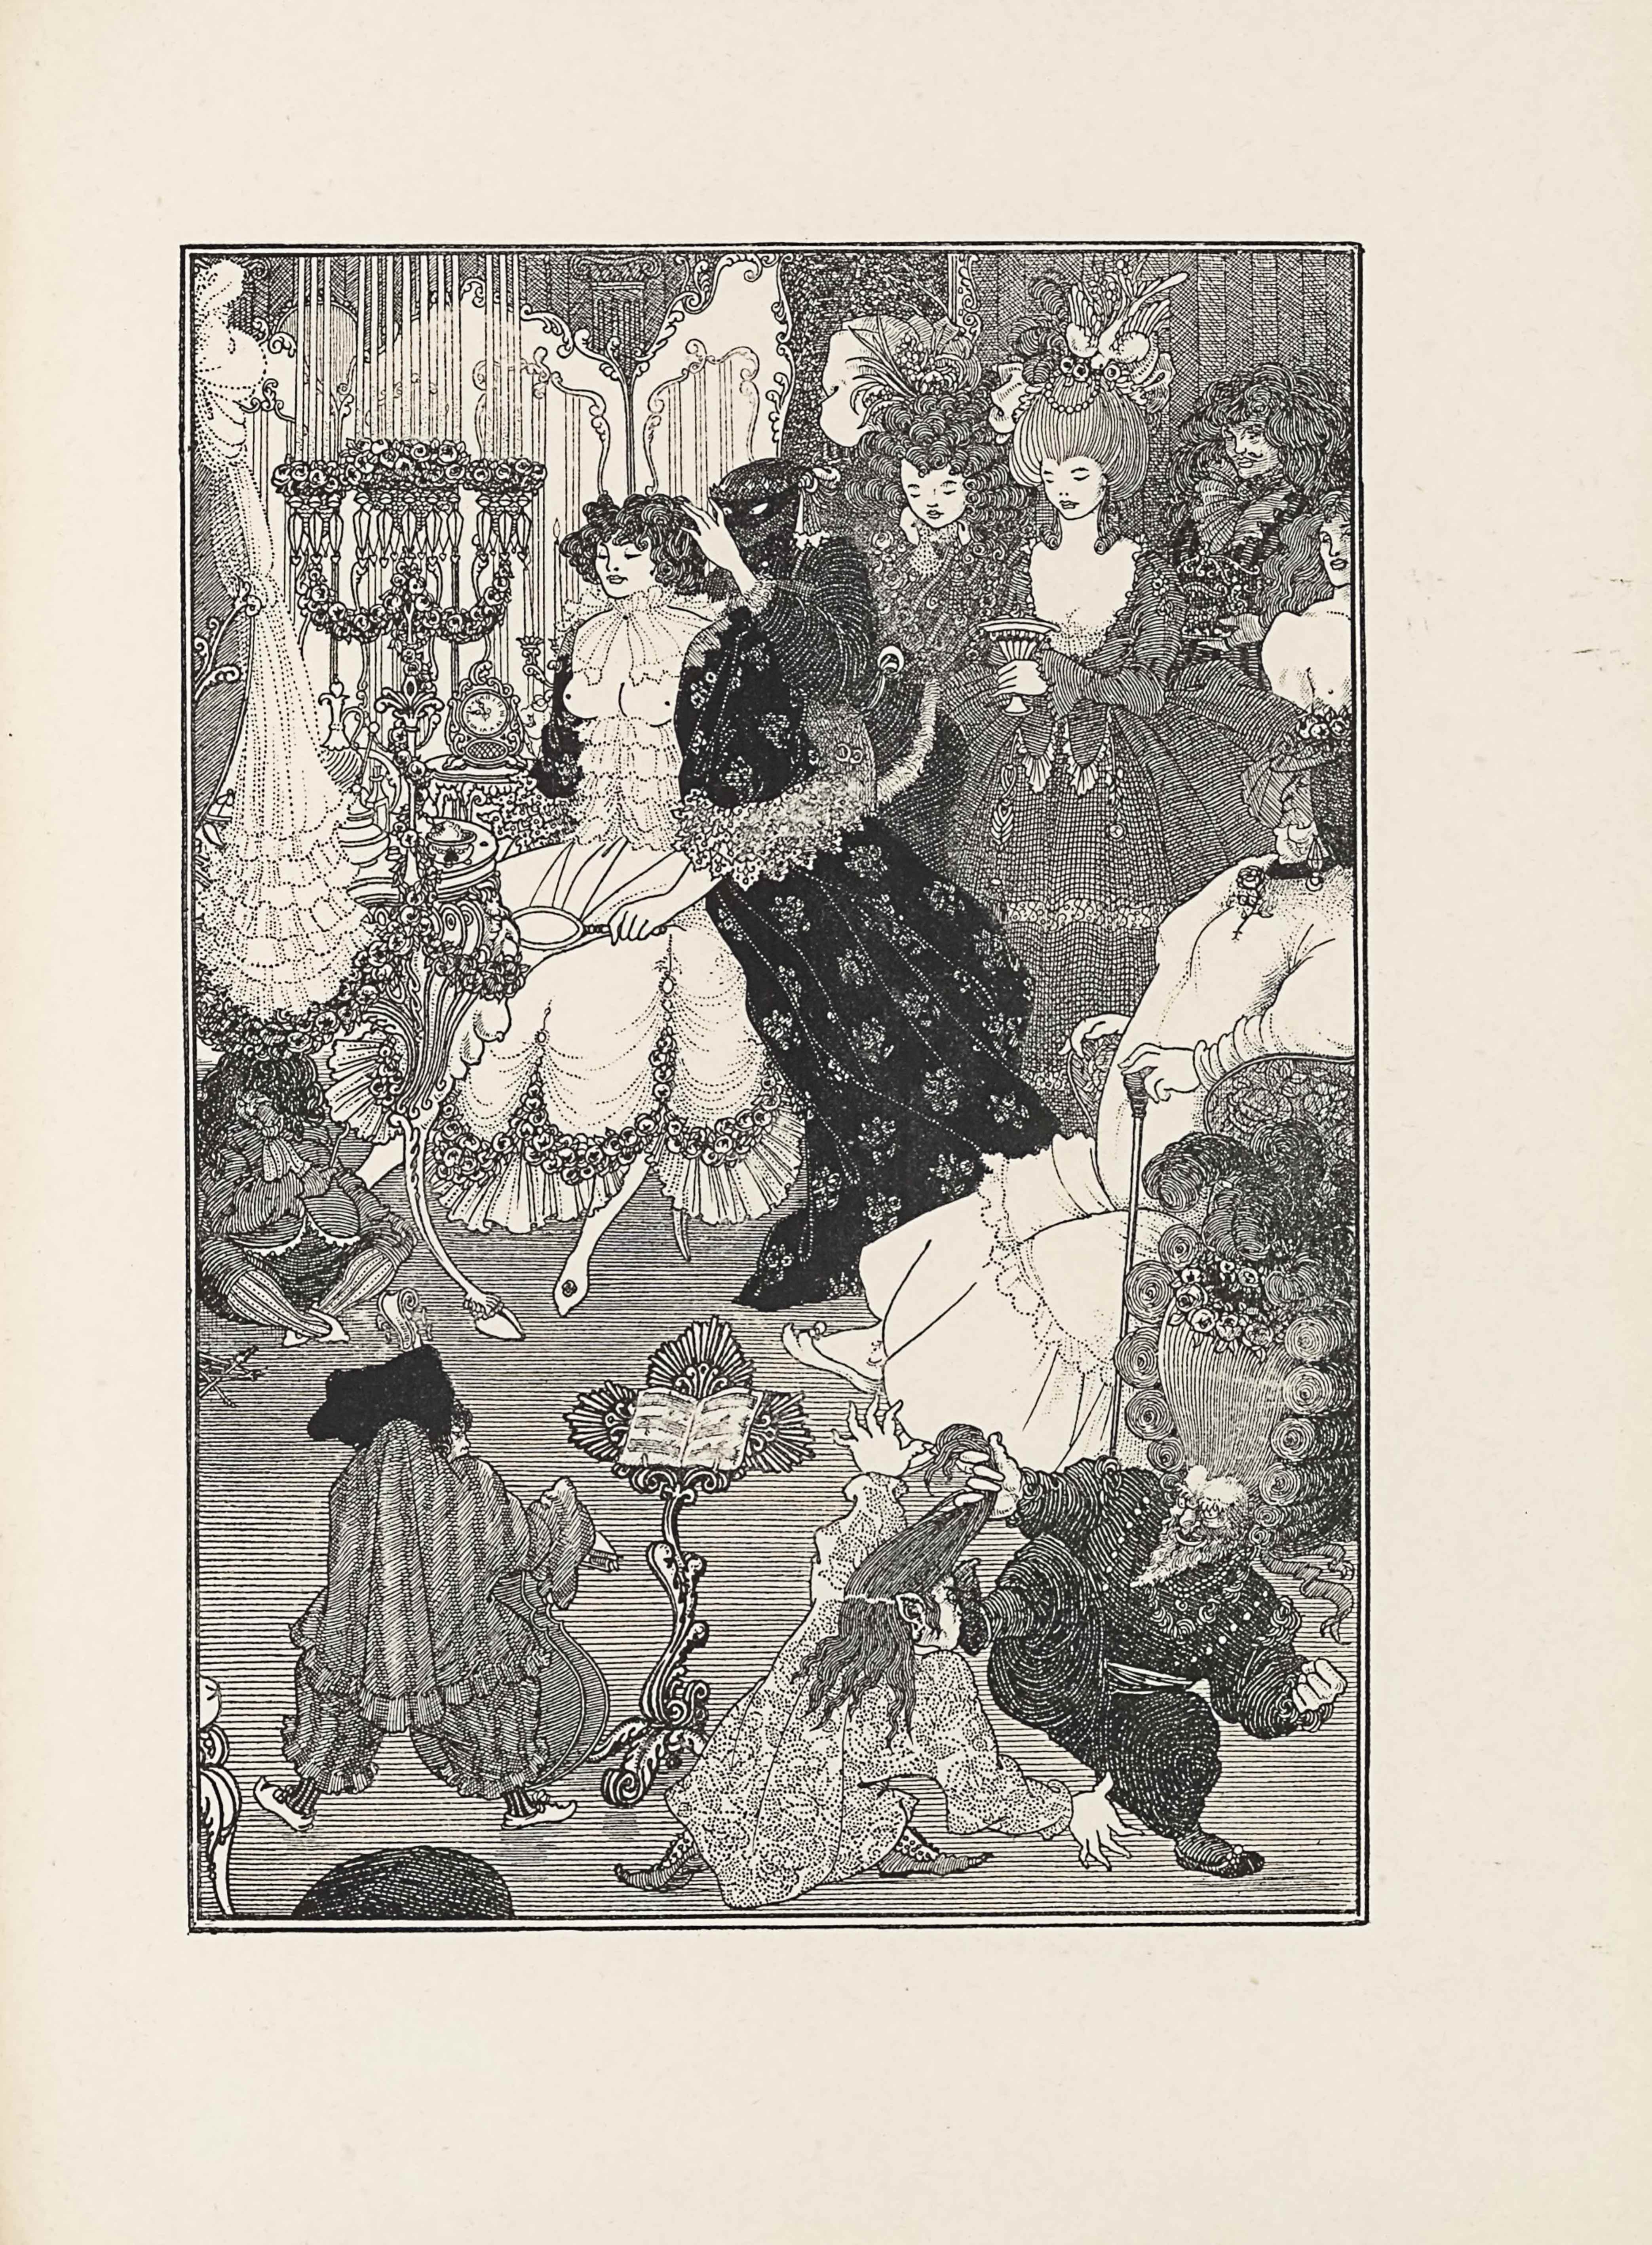 This line-block reproduction of a pen-and-ink drawing is in portrait orientation. The image is of a room or boudoir that includes one woman getting ready and other people standing around her, while small men fight and play music. In the foreground are three small men. In the bottom left corner an ornamented chair legs sticks out slightly. To the right of the chair leg is the first small man, about half the height of any of the women in the image. He has his back to the viewer and is wearing baggy, vertically striped pants, and a long sleeve shirt with ruffles on the edges. He has a hunchback. On his feet he wears slippers with lifted toes. His face is turned slightly to the right and a partial profile is visible. On his head he wears a large dark bonnet. He has a cello in his left hand and a bow in the right. To the right of the man is an ornamented music stand with an open book of sheet music rested on top. To the right of the music stand, in the foreground, are the other two small men. The man closest to the music stand is dressed in slippers and a long tunic that has a spiral pattern embroidered on it. He is leaning to the right and reaching out with both arms to grab the other man. He has elf ears and long hair, some of which is being pulled by the man to the right. He also has the other man’s foot kicking at his face. The other man is facing the viewer. He has his right leg lifted up and is in the midst of kicking the other man’s face. His right hand is holding the chunk of the other man’s hair. He is wearing dark, baggy, horizontally striped pants, and a long sleeve shirt. He has a long pointy beard, mustache, and bushy eyebrows. His mouth is open and in a smile. His head is topped with a huge wig. The front of the wig has the hair pulled straight up vertically and the sides are lined with large coils. At the top of the wig is a garland of flowers and a plume of feathers. With his wig on he takes up nearly half the height of the page. Behind the wig is an older woman seated in a chair, facing to the left of the page. She is heavier-set and wearing slippers with a long gown that has a line of ruffles on the skirt. She has her arms on the chair armrests and in her left hand is a walking stick resting on the ground. She has a flower pinned to her chest and her face appears in profile. The back of her head is cut off by the frame. She is wearing tassel earrings and a headpiece with a few flowers on top and a light veil hanging down to her chin in front of her face. On the far left side of the page, also in the mid-ground, is a small man seated on the floor with his legs crossed. He has on vertically striped tights and a plain pair of slippers. He is wearing short pants and a top coat with ruffles at the bottom. He wears a large necktie and a big, dark, and curly wig. He seems to be underneath a table. Directly to the right of him is a tall ornamental candle holder that has flower garlands wrapped up around it and crystal pieces hanging off at the top. Above the man and to the left of the candle holder, a dress is hanging from a coat rack that is mostly out of the frame. The dress is long and ruffled. A table, the one that the man seems to be underneath, sits to the right of the dress and is topped with a perfume flask and a small jewelry box. A woman sits in a chair to the right of it, turned towards the viewer but slightly angled towards the left side of the page. She is dressed in a long skirt with a ruffled bottom and flower garlands that loop around above the ruffles. She has on a corset that rises to just below her chest. Her breasts are shown bare. Around her neck she has a transparent chiffon bow. She has on an open dressing gown decorated with a floral design, and it falls all the way to the ground. Her hair is short and curly, and a person to her right has their hands in it. In her left hand and resting on her lap is a handheld mirror. Behind the woman and taking up the top left corner of the page is a three-piece ornamented standing mirror, and in front of it are the long candles coming from the top of the ornamented holder. A wall is directly behind the mirror. The person who has their hands in the seated woman’s hair is dressed in all black. Their face is completed covered in a mask except for their eyes. The person is wearing a tight long sleeve shirt and pants. More in the background and to the right of the dark figure are four people standing. The person on the far left is a woman, visible only from the waist up and wearing a floral patterned gown. She has on a tight scarf and is looking towards the left side of the page at the masked figure. She has on a large wig of coiled hair with a big leaf protruding out with an assortment of other florals on top. To her right is a woman fully visible. She is wearing a ballroom gown with a big skirt and long sleeves. The dress has a low neckline and she is holding a goblet with her left hand. She has on a big wig with straight hair and a chain of pearls hangs down from the top where many flowers and plumes rise up. To her right, the upper body of a man is visible. He is turned towards the left side of the page with a three-quarters profile visible. He has on a neck piece with big ruffles and holds a decorated box. He has a small twirled mustache and long wavy hair. To the right of him is half the upper body of another man, cut off by the frame. This man is shirtless and his head is turned to the left side of the page. He has long wavy hair. Behind the four figures that make up the right side background is a wall.